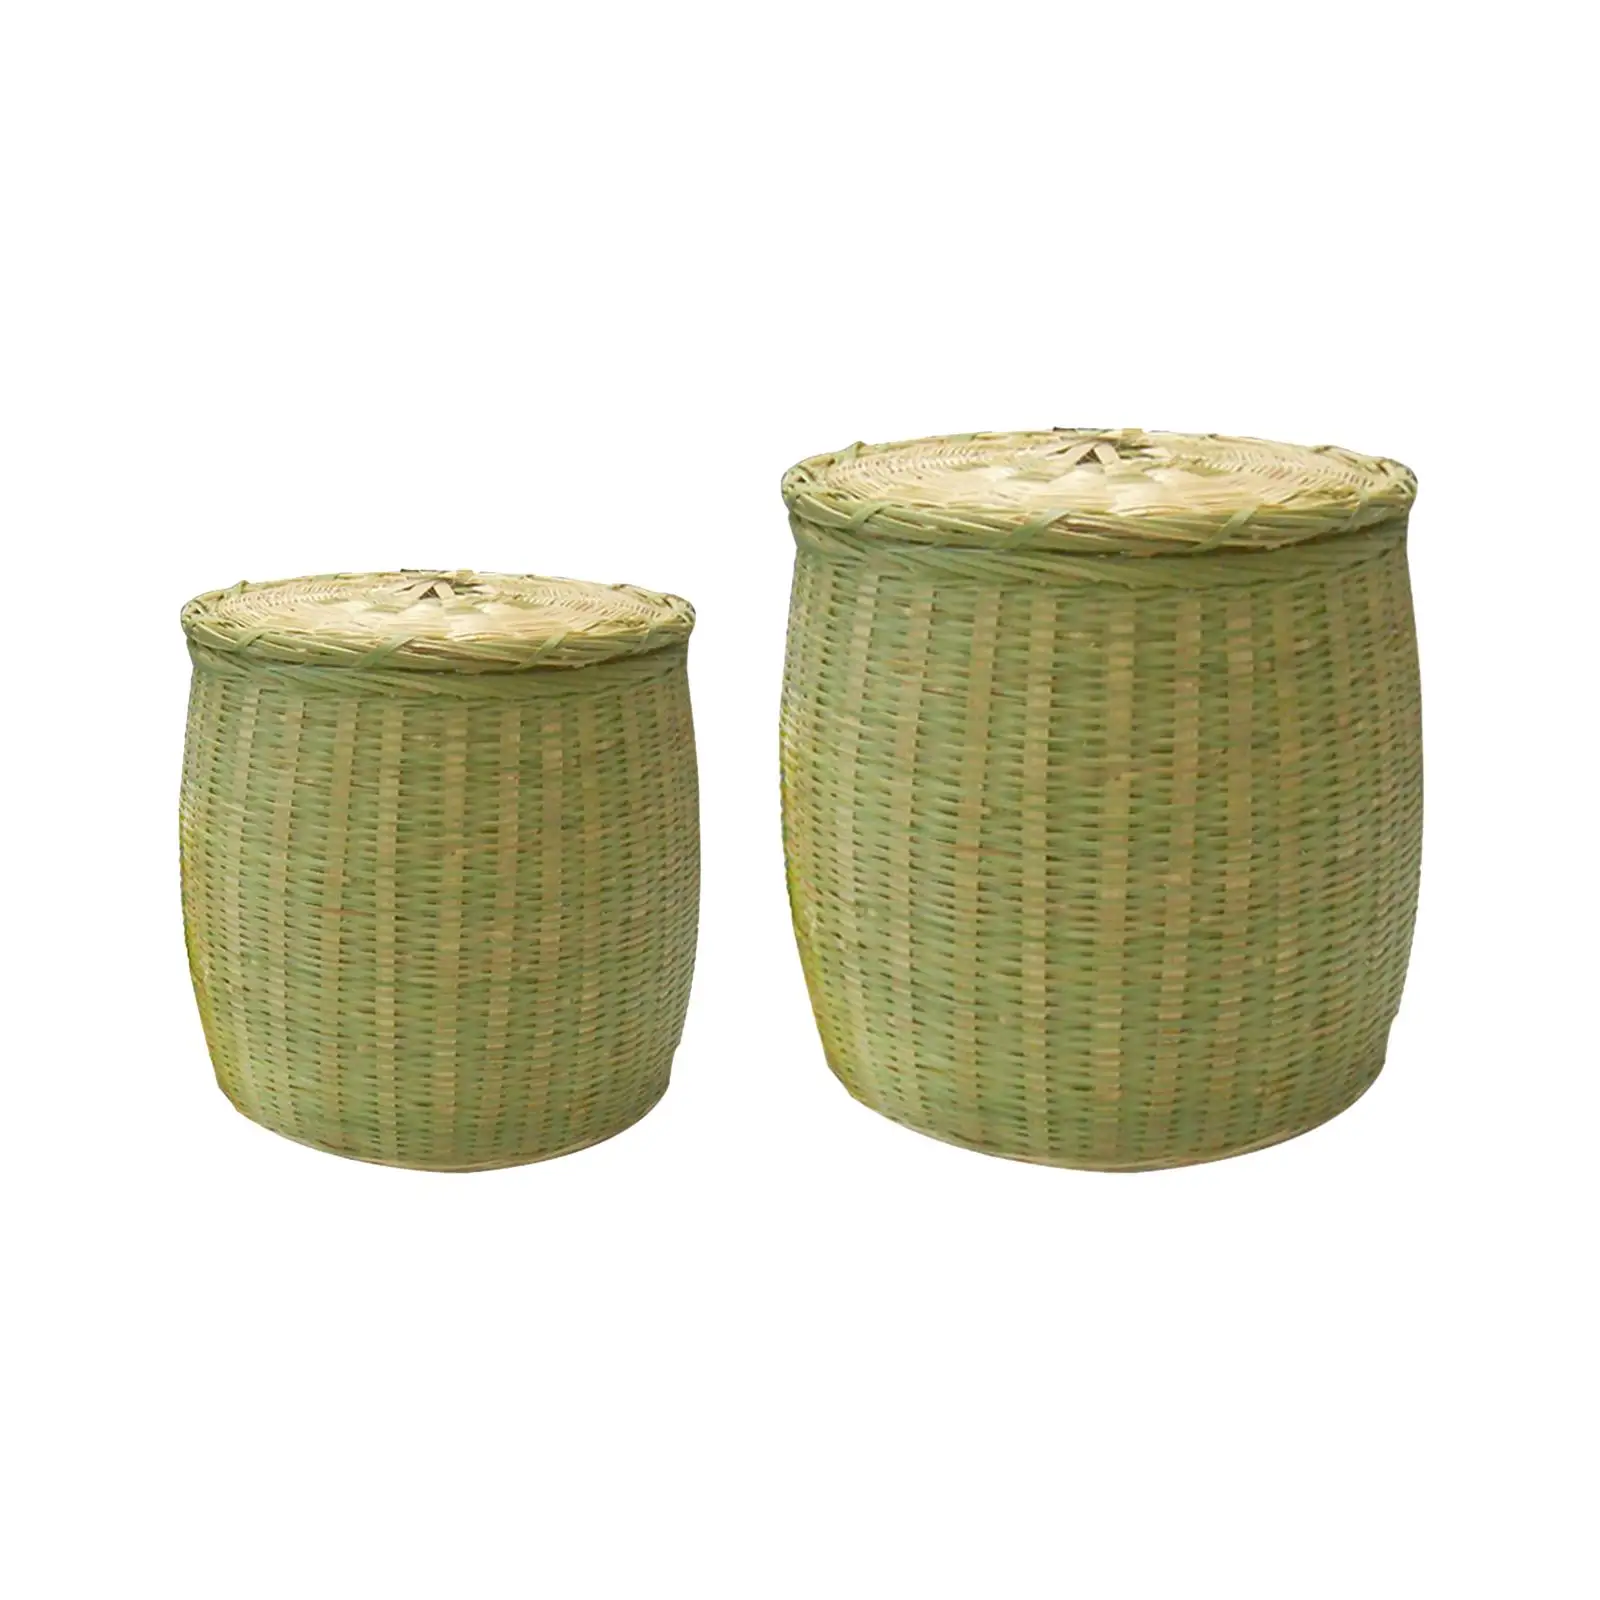 Decorative Storage Basket Rustic Countertop Portable Bamboo Woven Basket for Living Room Sundries Wedding Bedroom Cosmetic